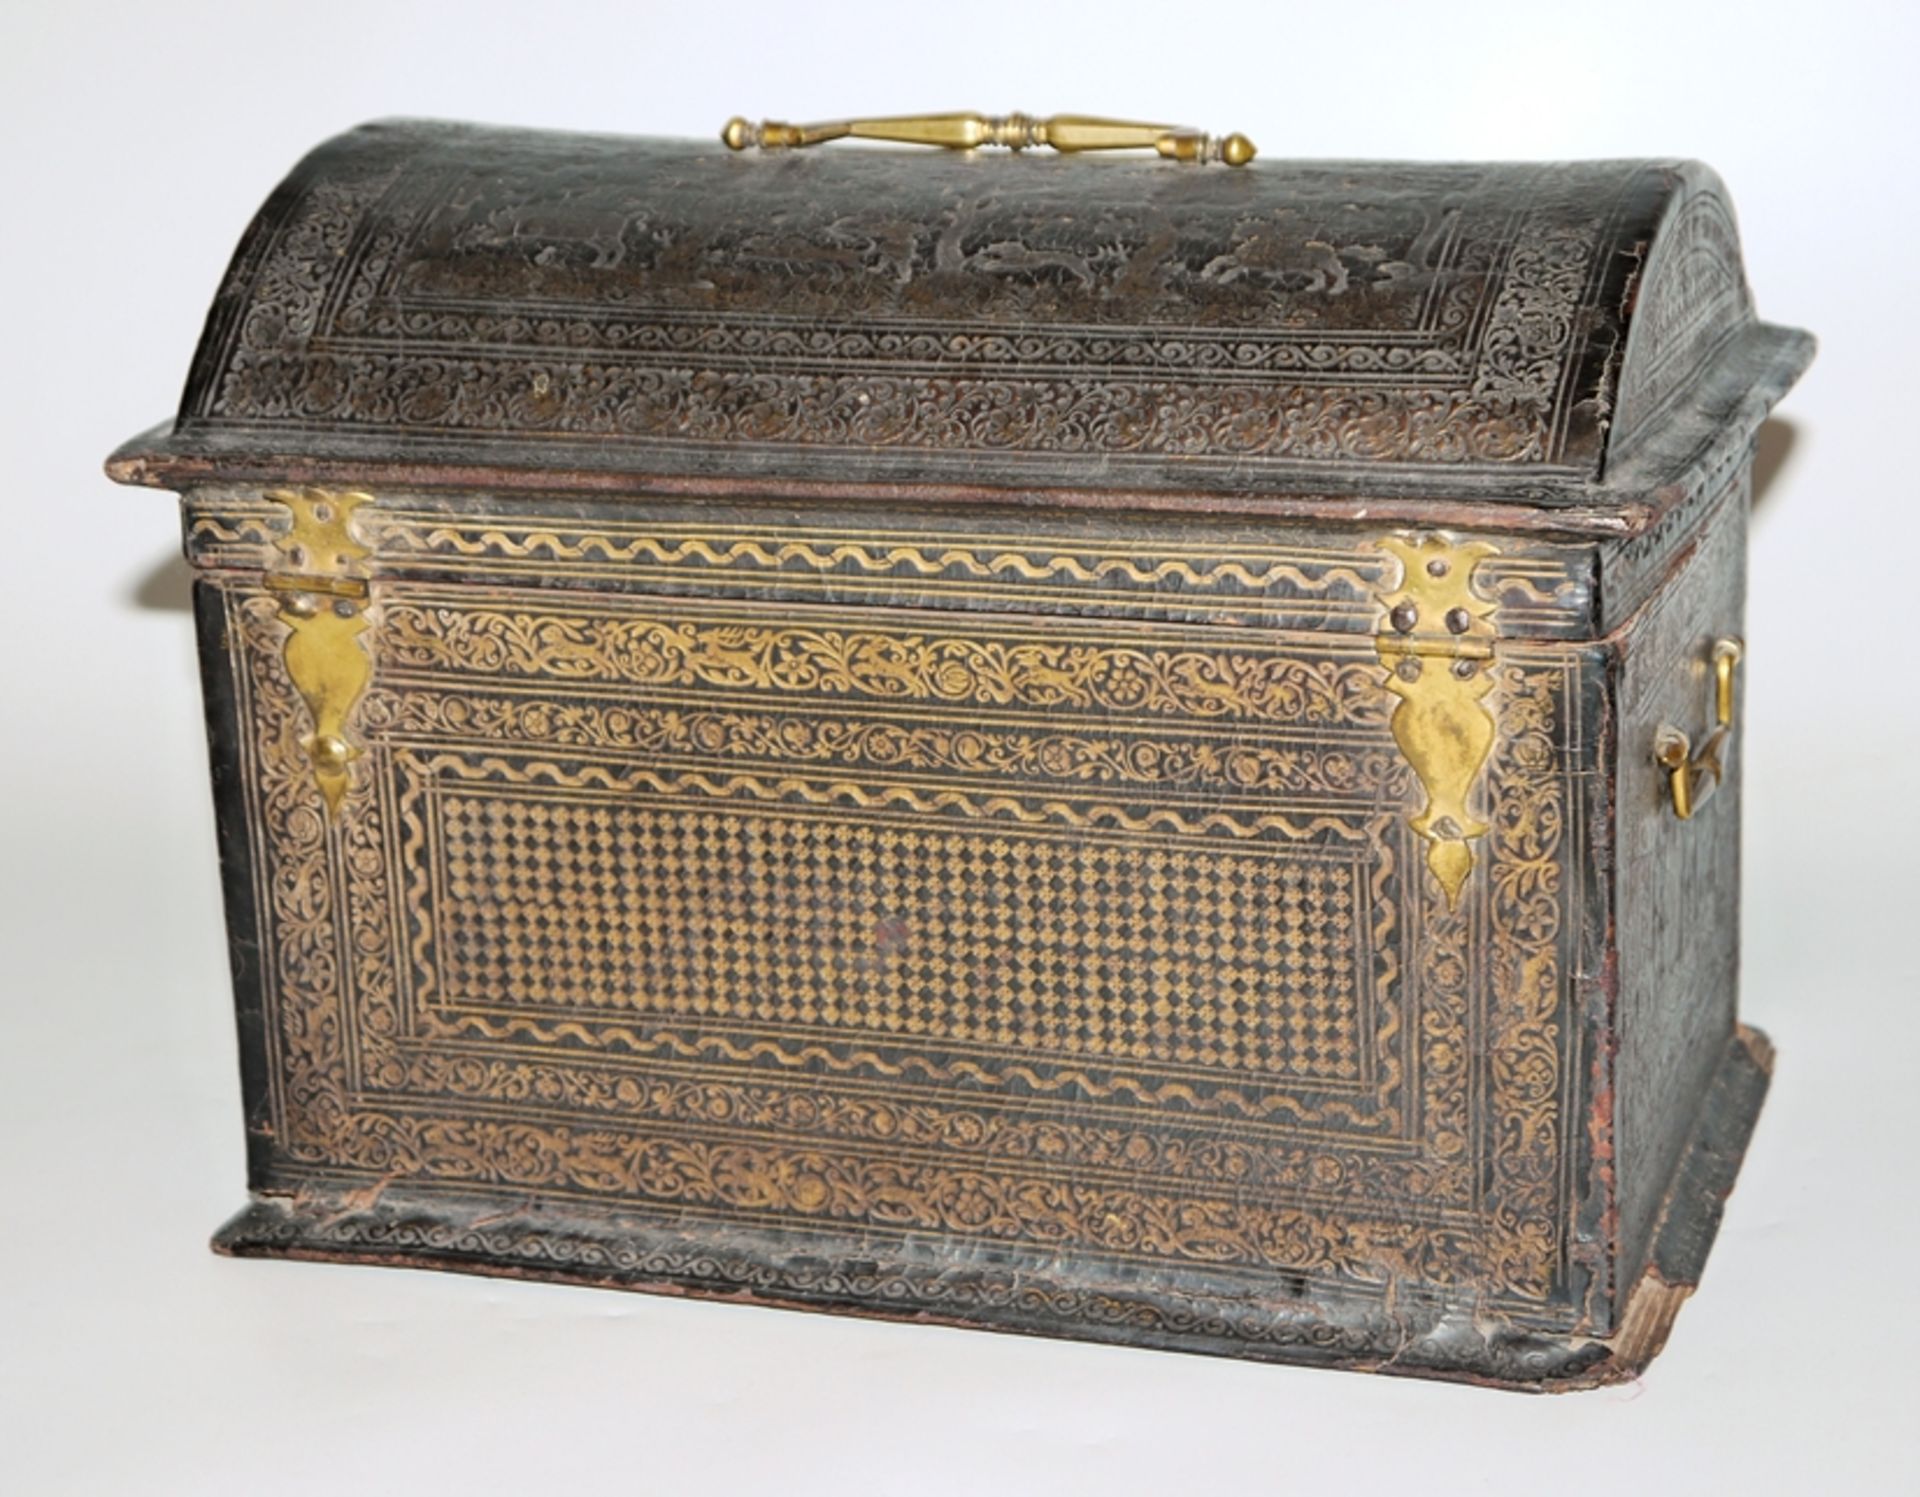 A Flemish leather casket with hunting scenes, probably Antwerp, c. 1600 - Image 2 of 7